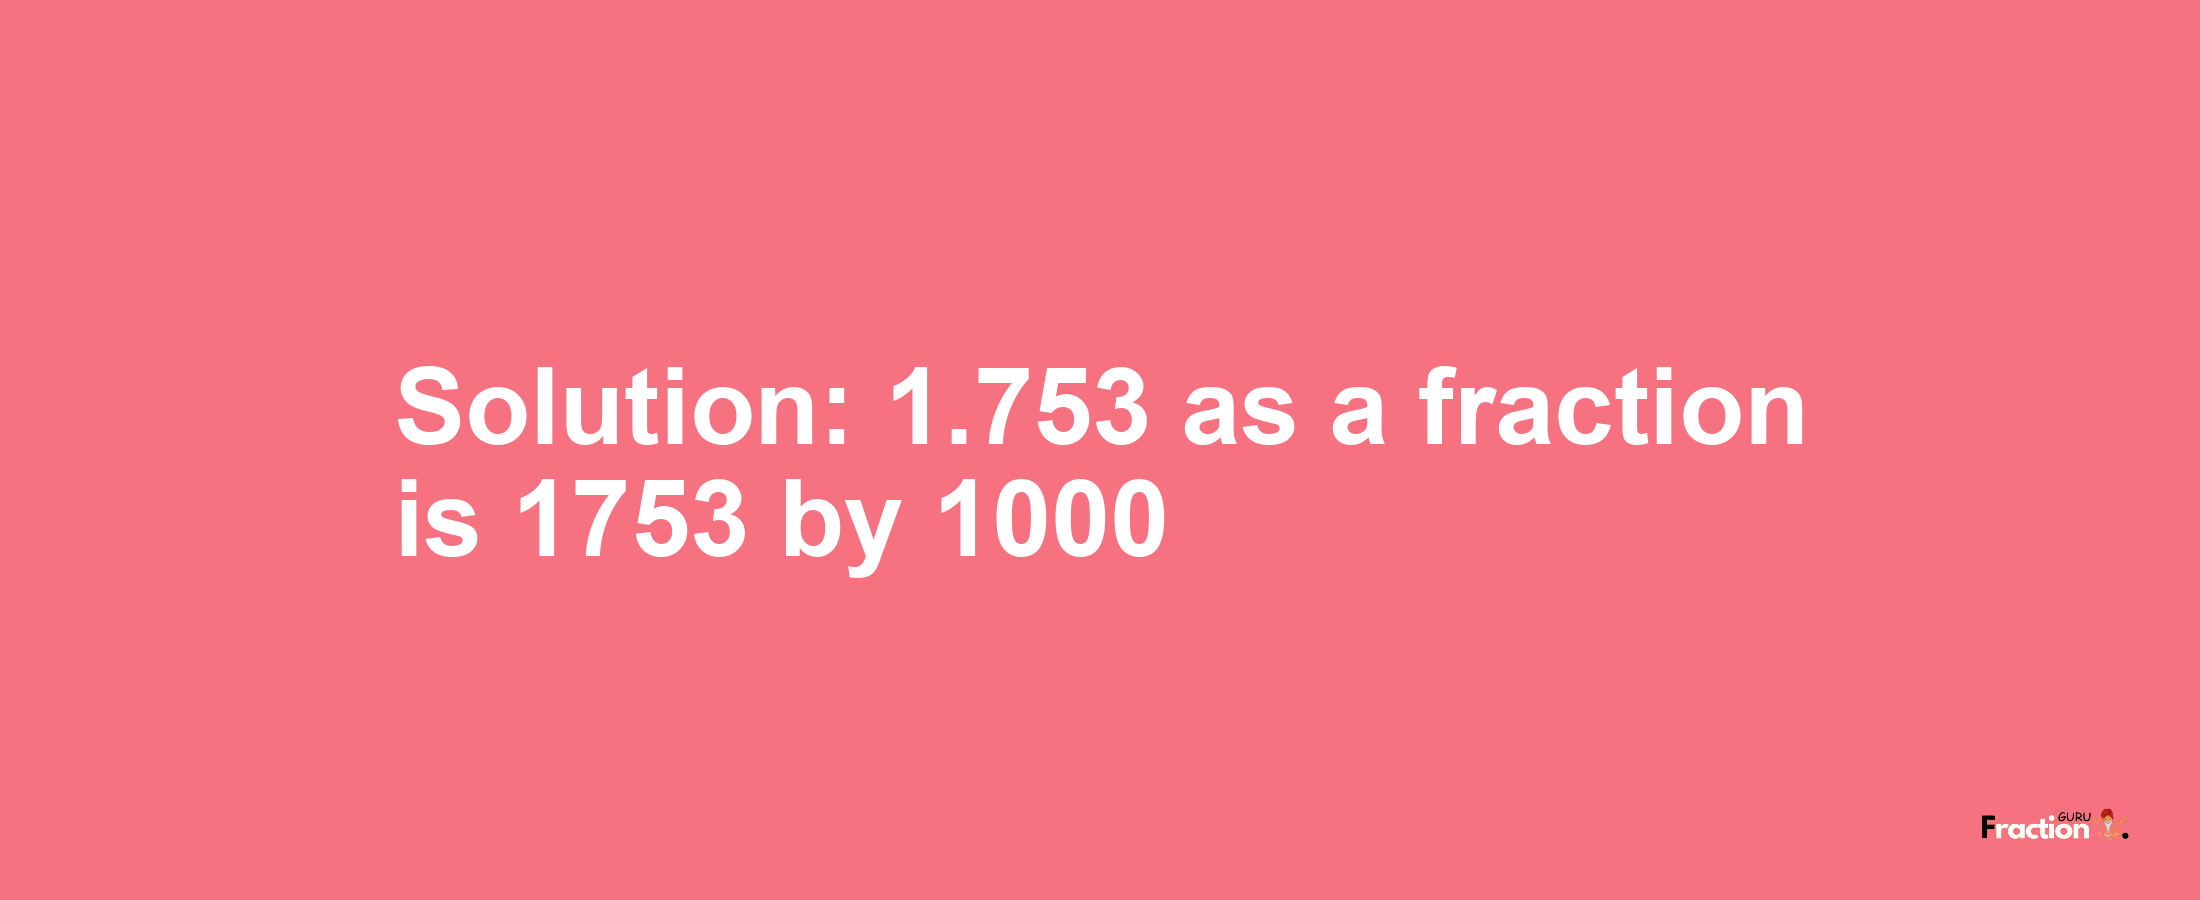 Solution:1.753 as a fraction is 1753/1000